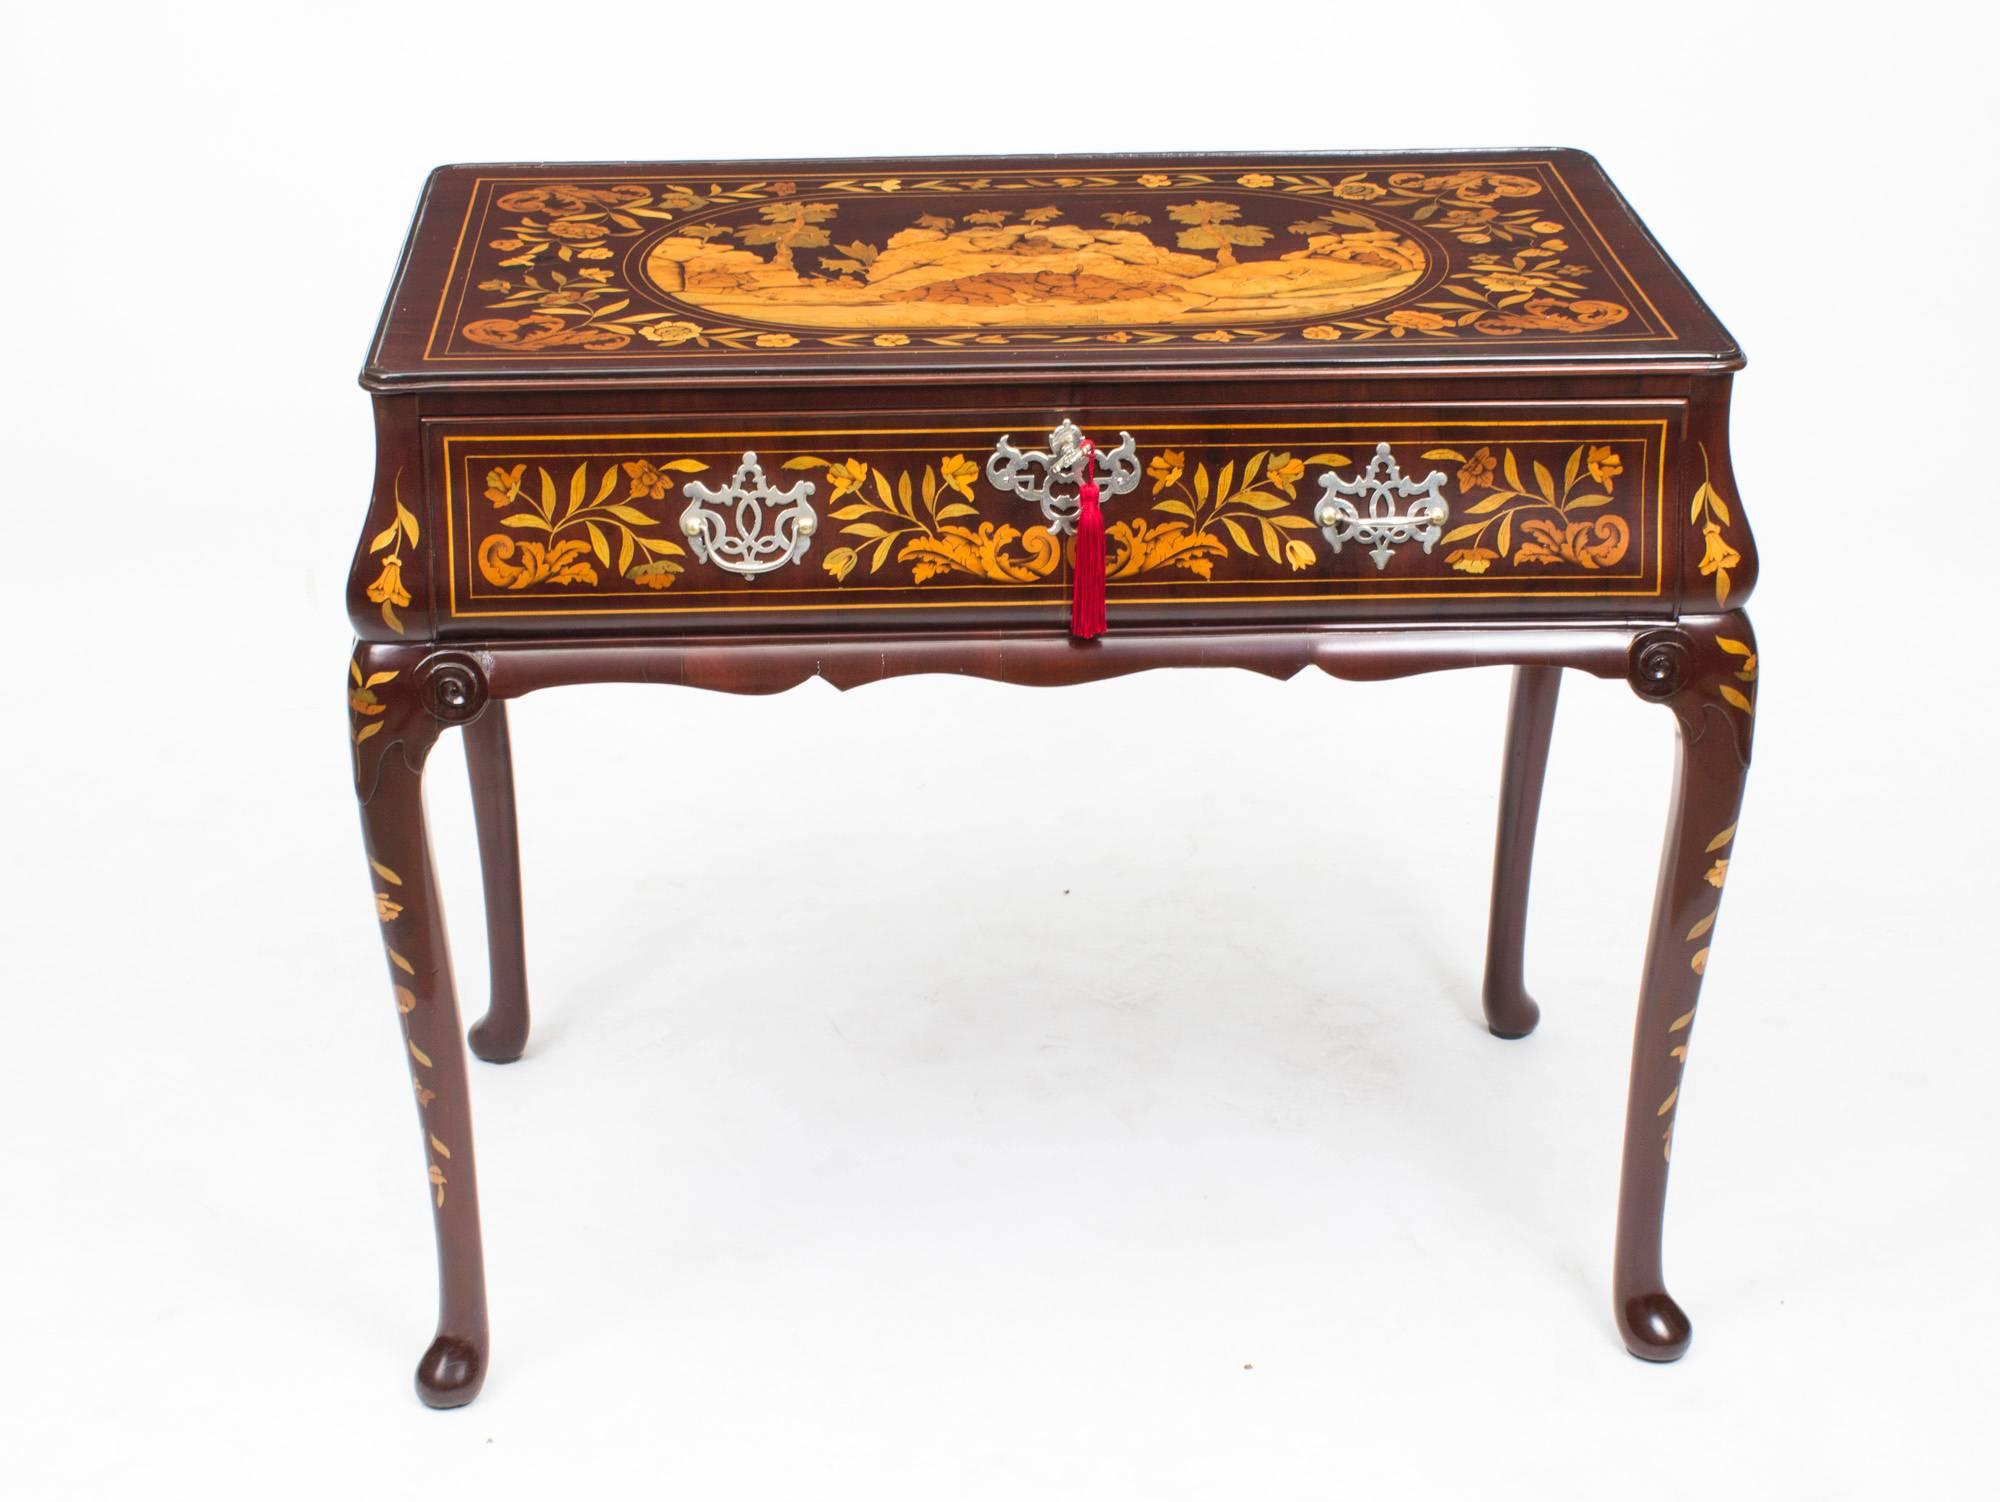 This is a beautiful antique Dutch marquetry side table, circa 1780 in date.

It is in fantastic condition and we have cleaned and French polished it to bring back it's original splendour.

It is handcrafted from Cuban mahogany with a wonderful